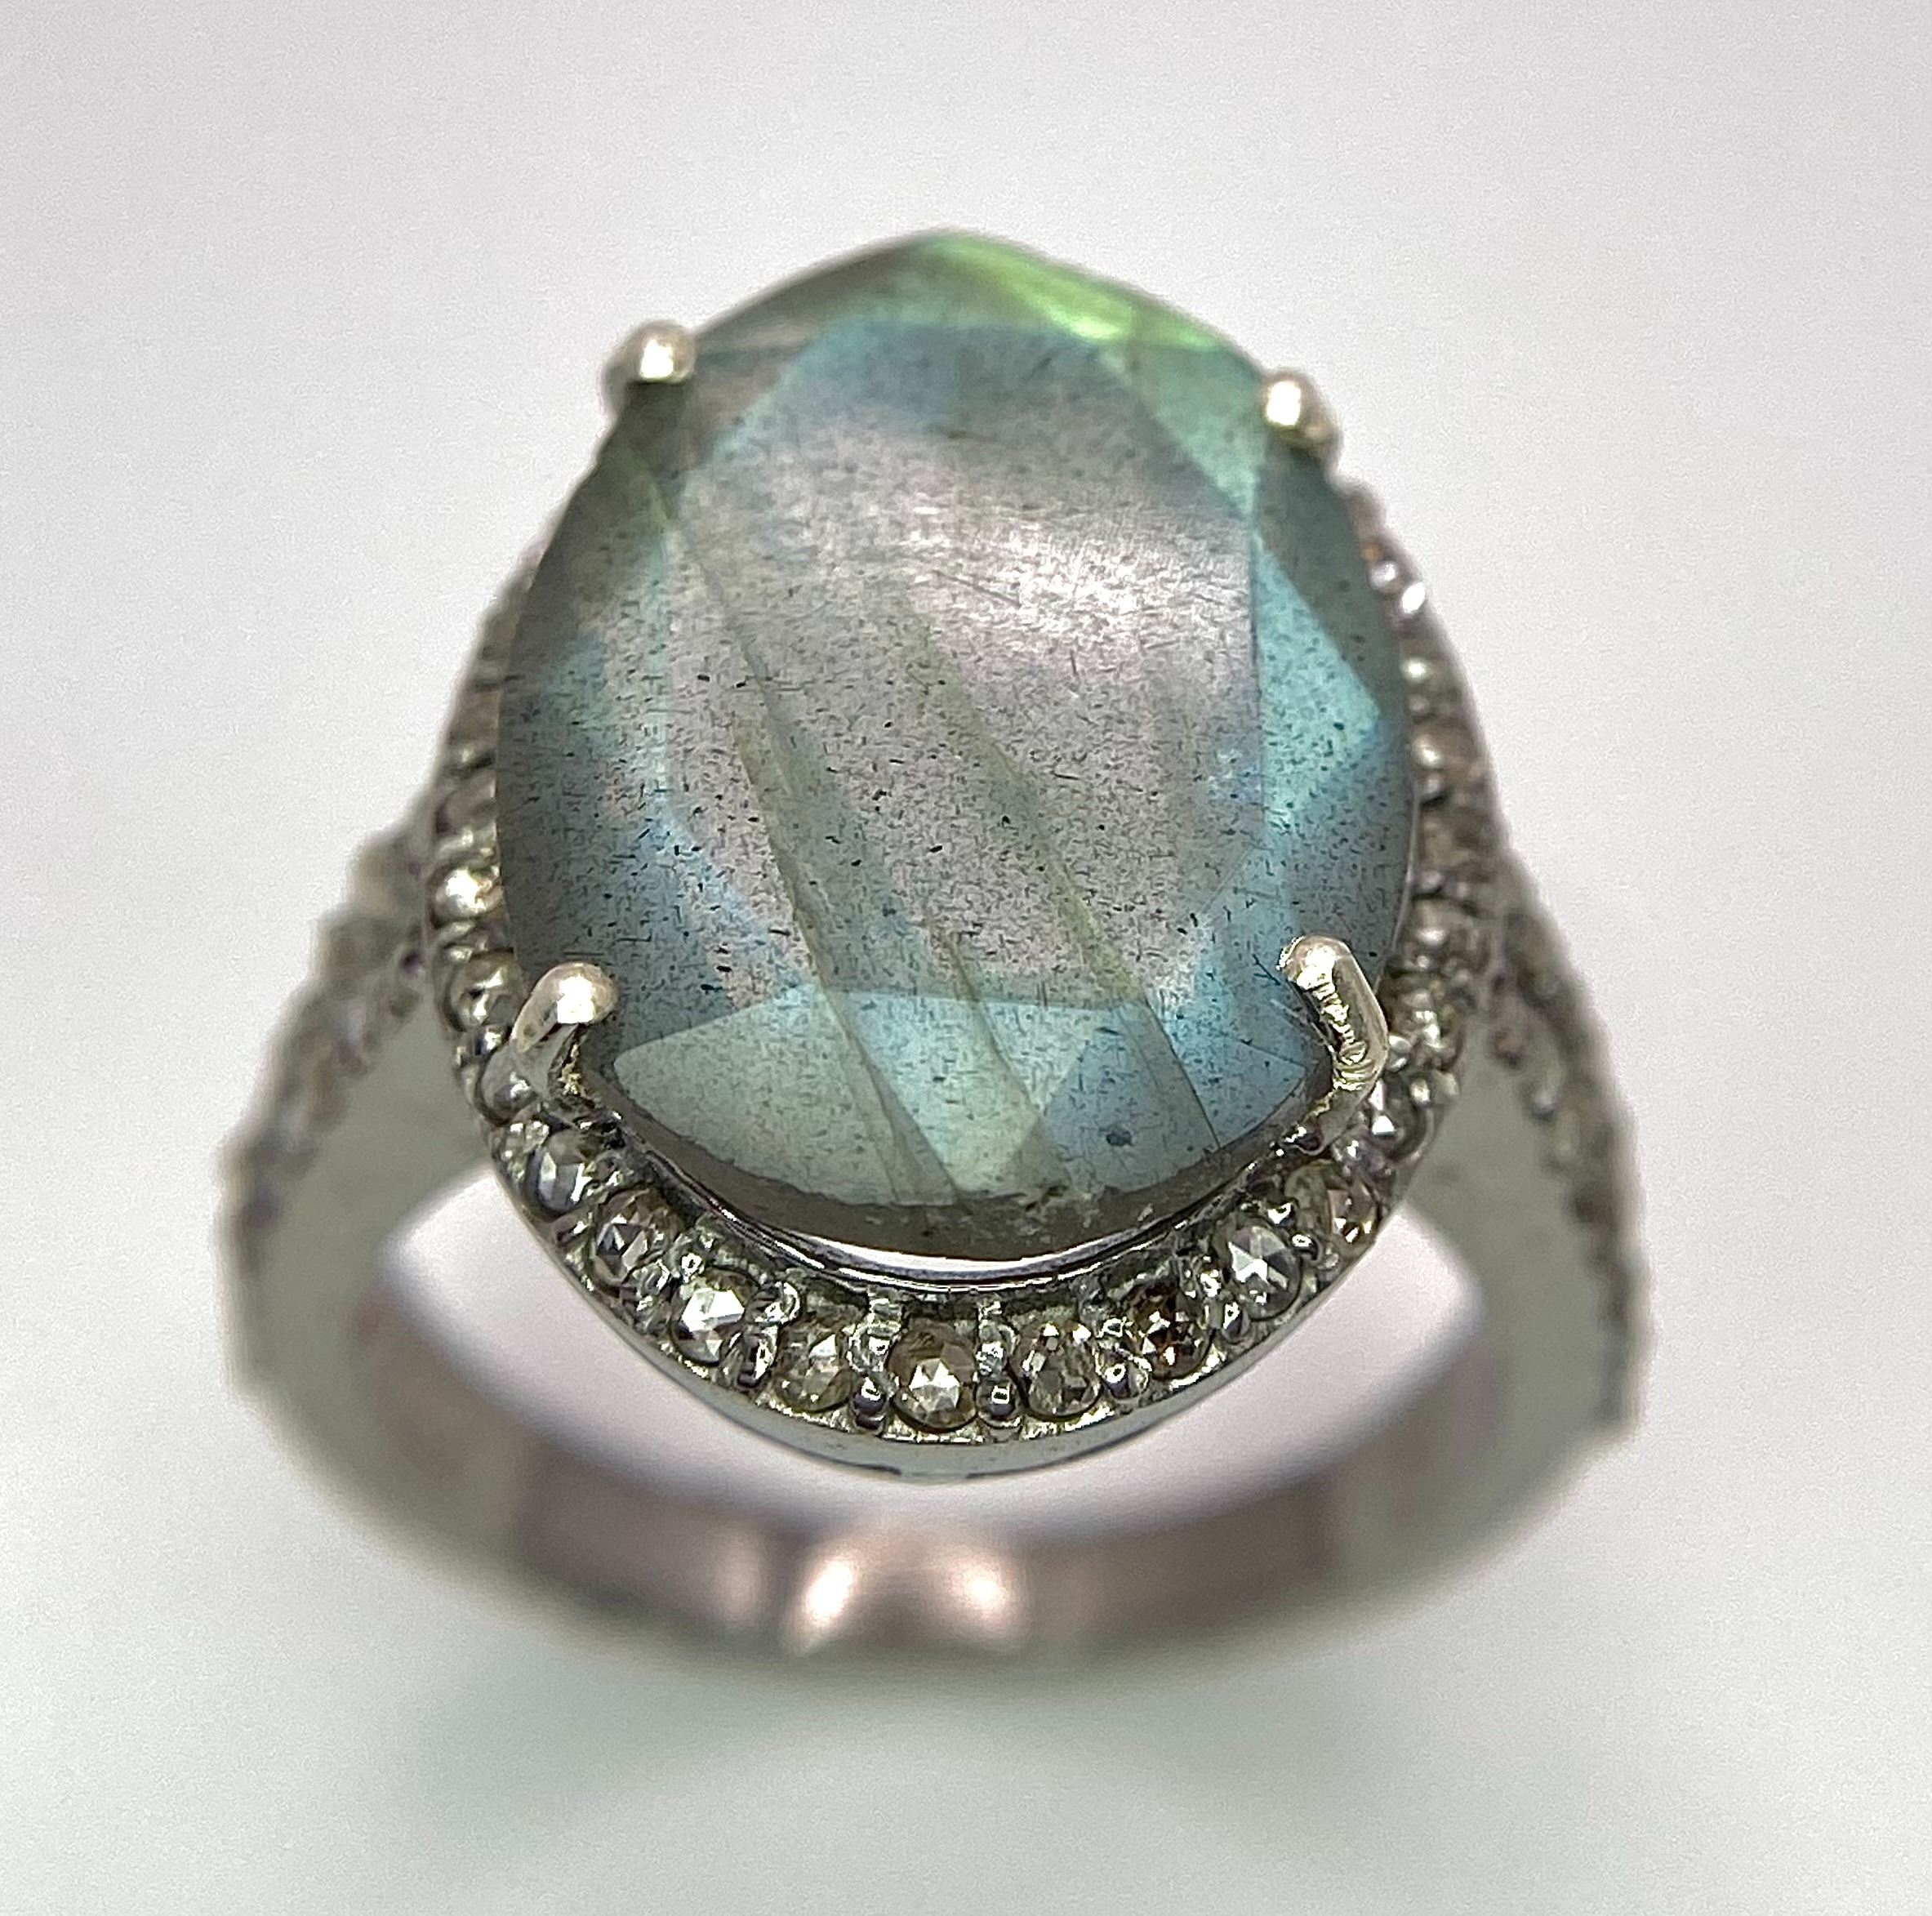 A 6.5ct Labradorite and Rose cut Diamond Ring. Diamonds- 0.60ctw. Size N. Comes with a